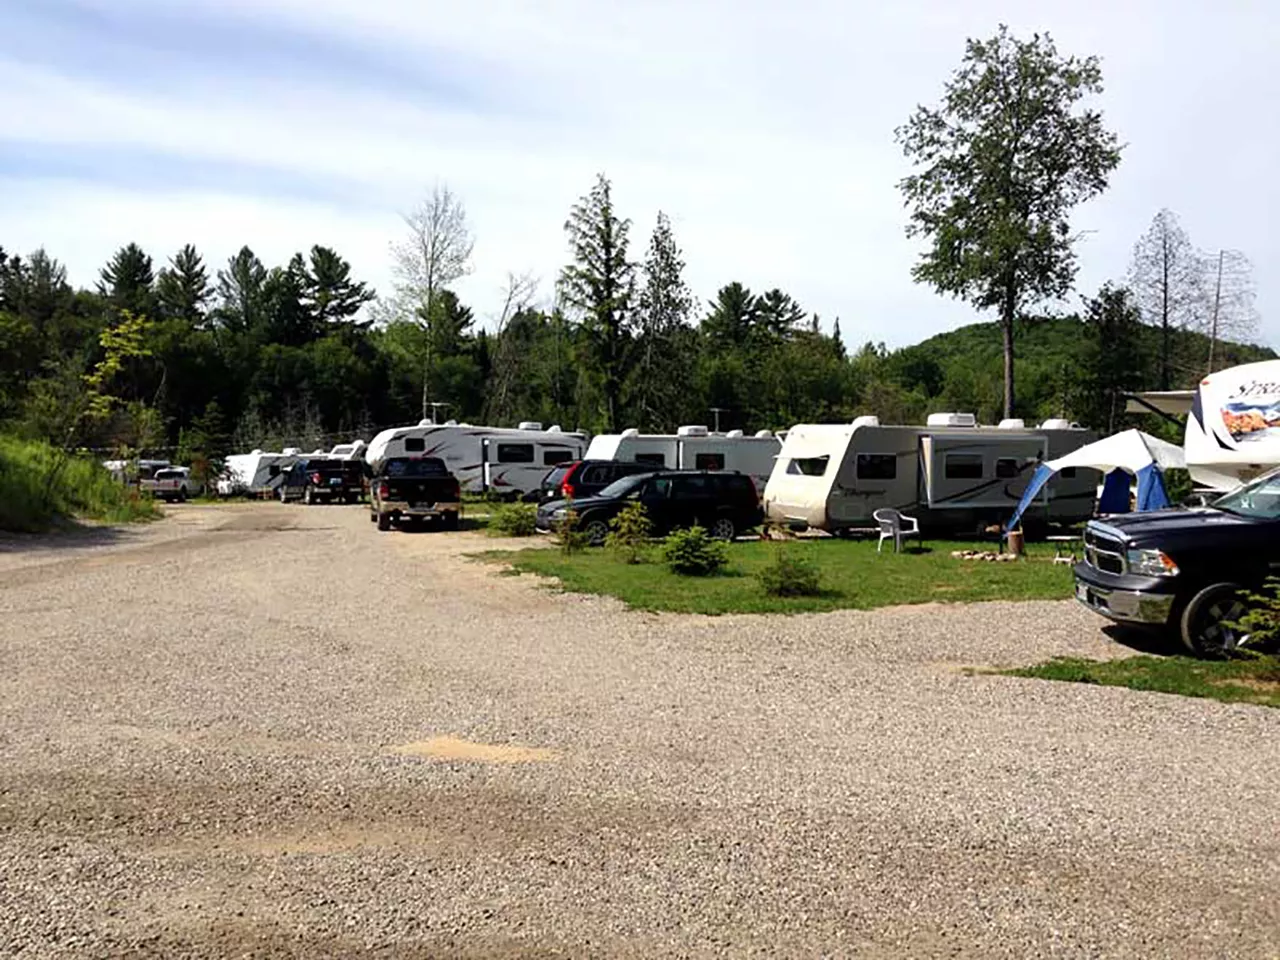 Camping Saint Andre in France, Europe | Campsites - Rated 4.4